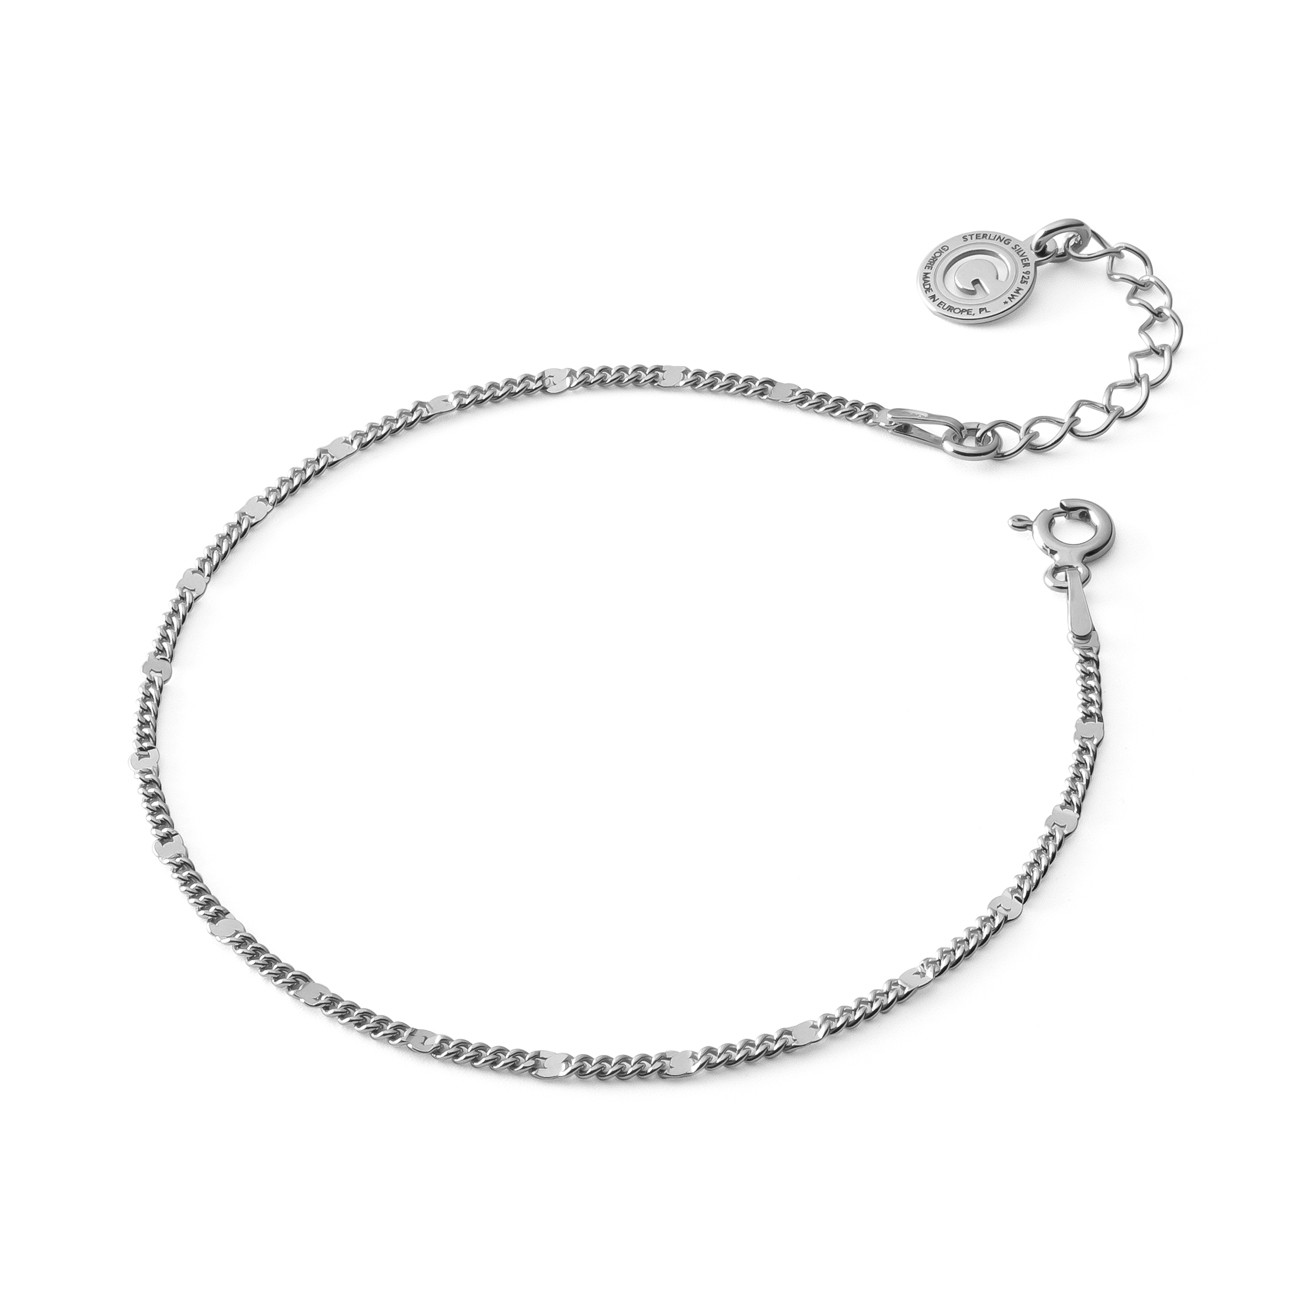 Delicate armor bracelet chain with plates, sterling silver 925